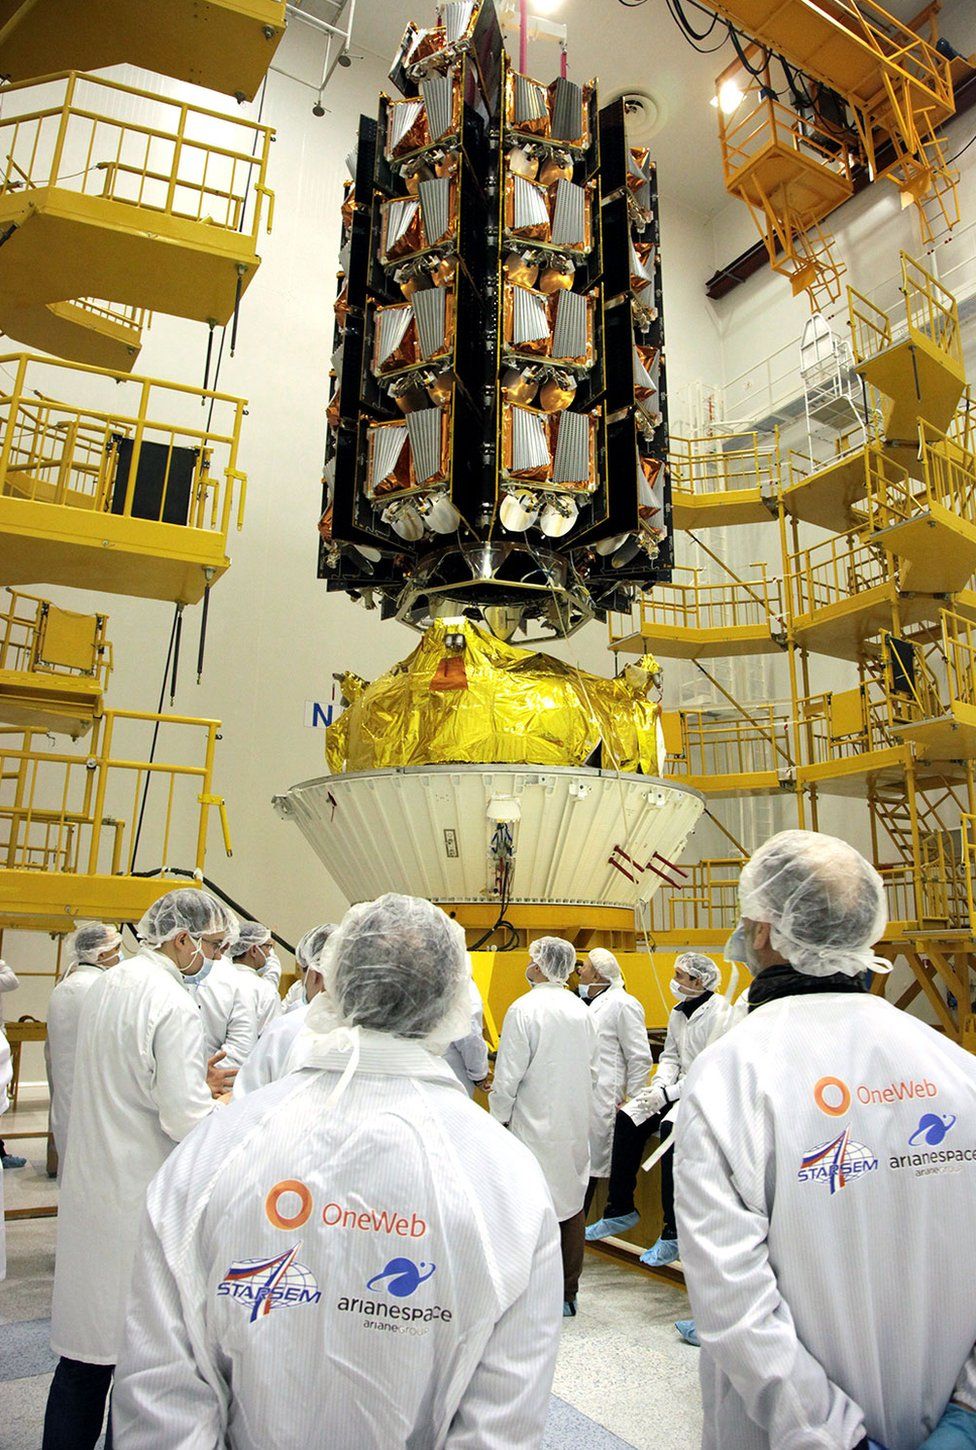 OneWeb satellites ready for launch